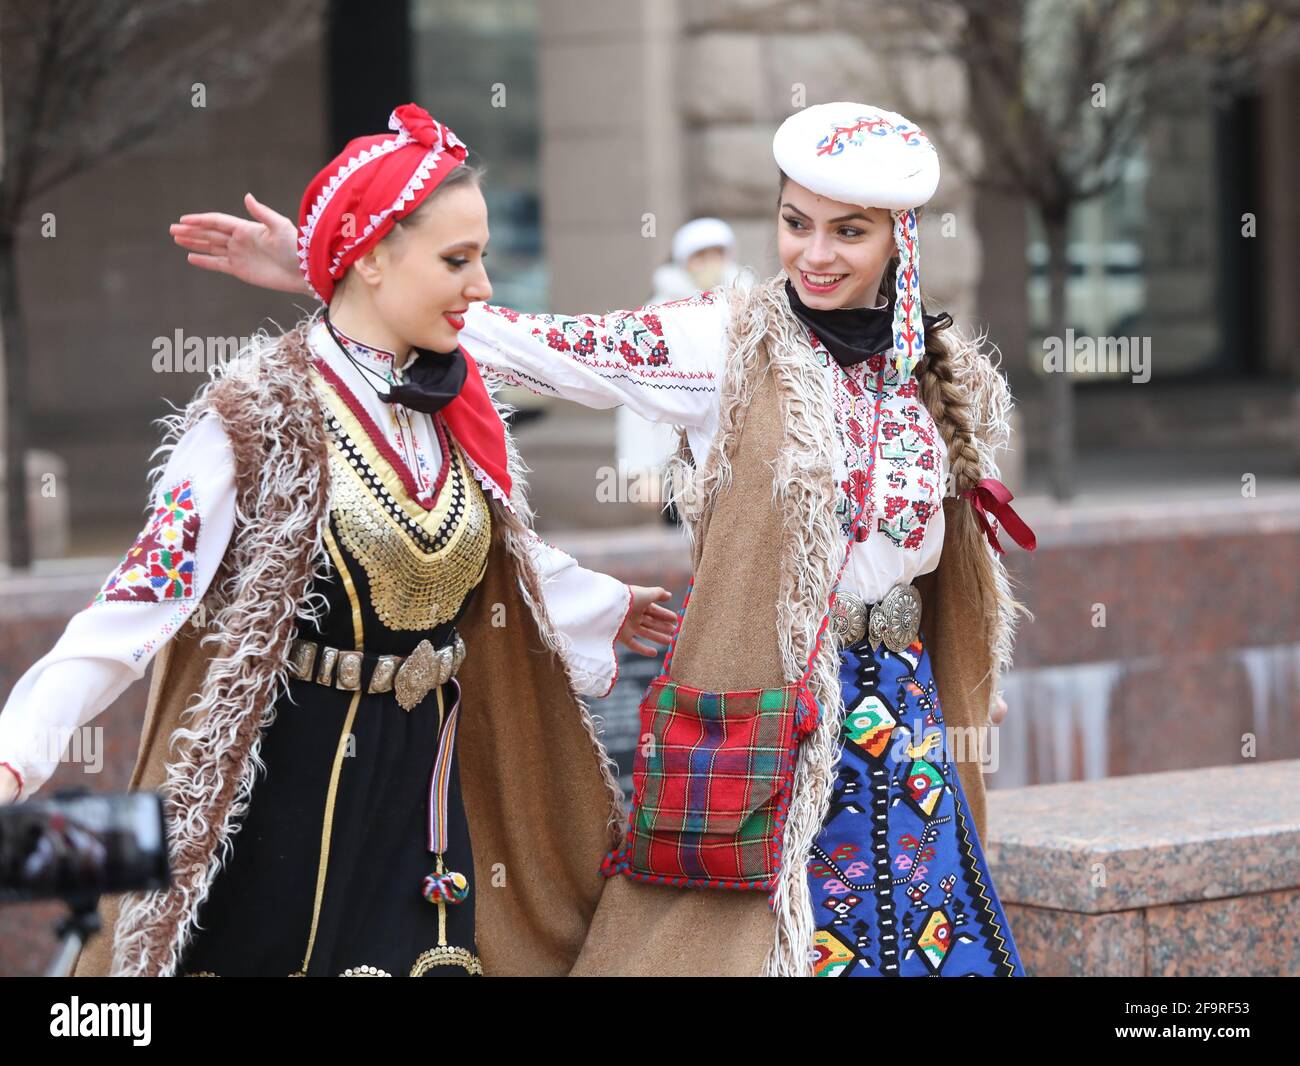 People in traditional folk costumes perform the Bulgarian folk dance 'Horo' in the center of Sofia, Bulgaria Stock Photo